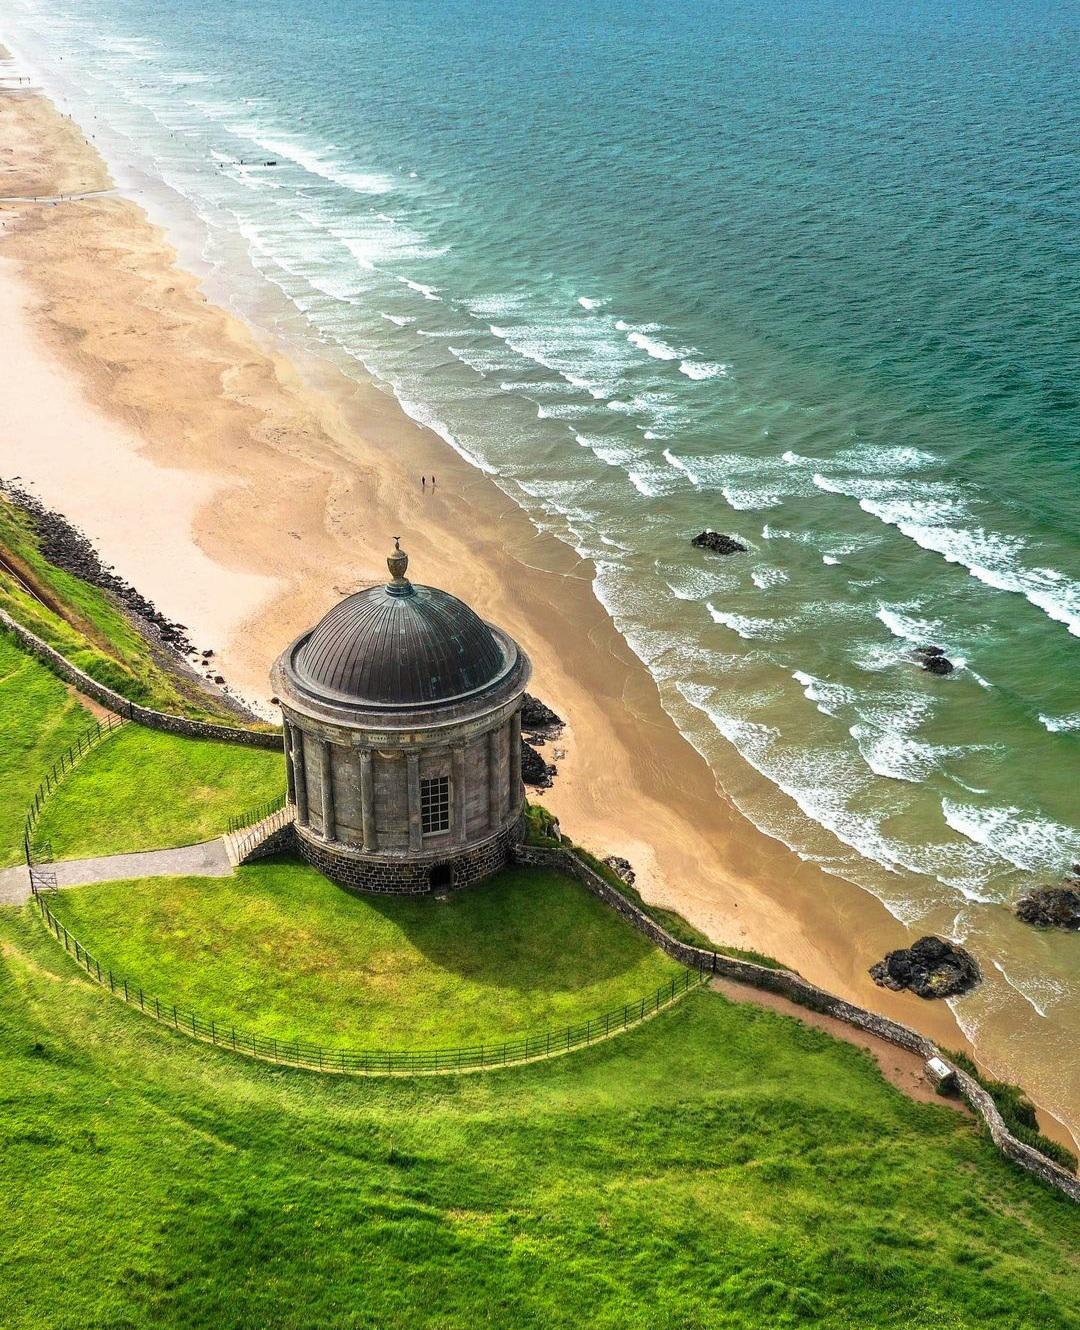 The 18th century Musseden Temple perched the vertical cliffs of Downhill Beach, near Castlerock, County Antrim, Ireland.